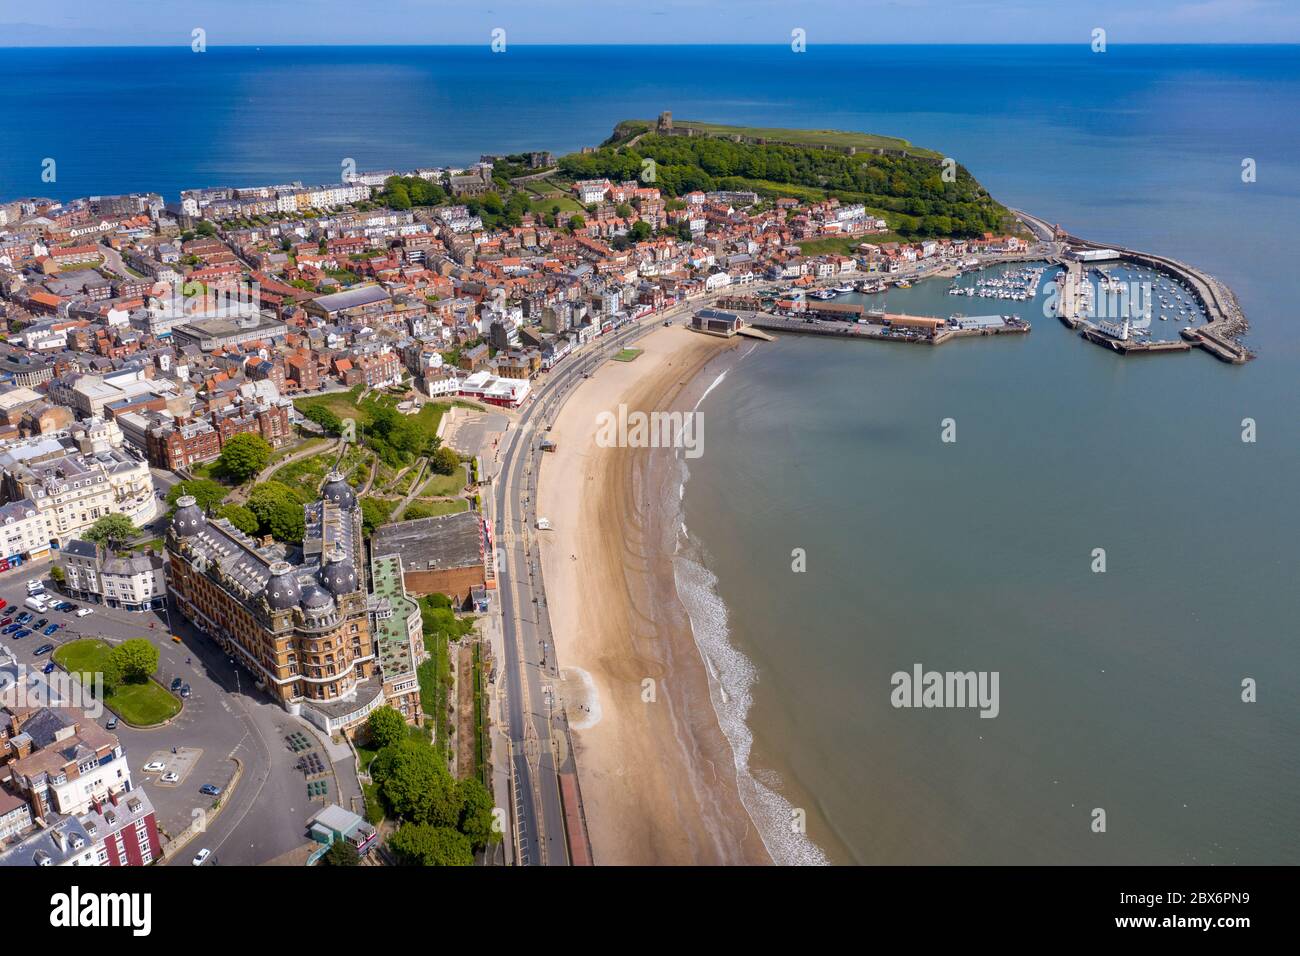 Aerial photo of the town centre of Scarborough in East Yorkshire in the UK showing the coastal beach and harbour with boats and the Scarborough Castle Stock Photo